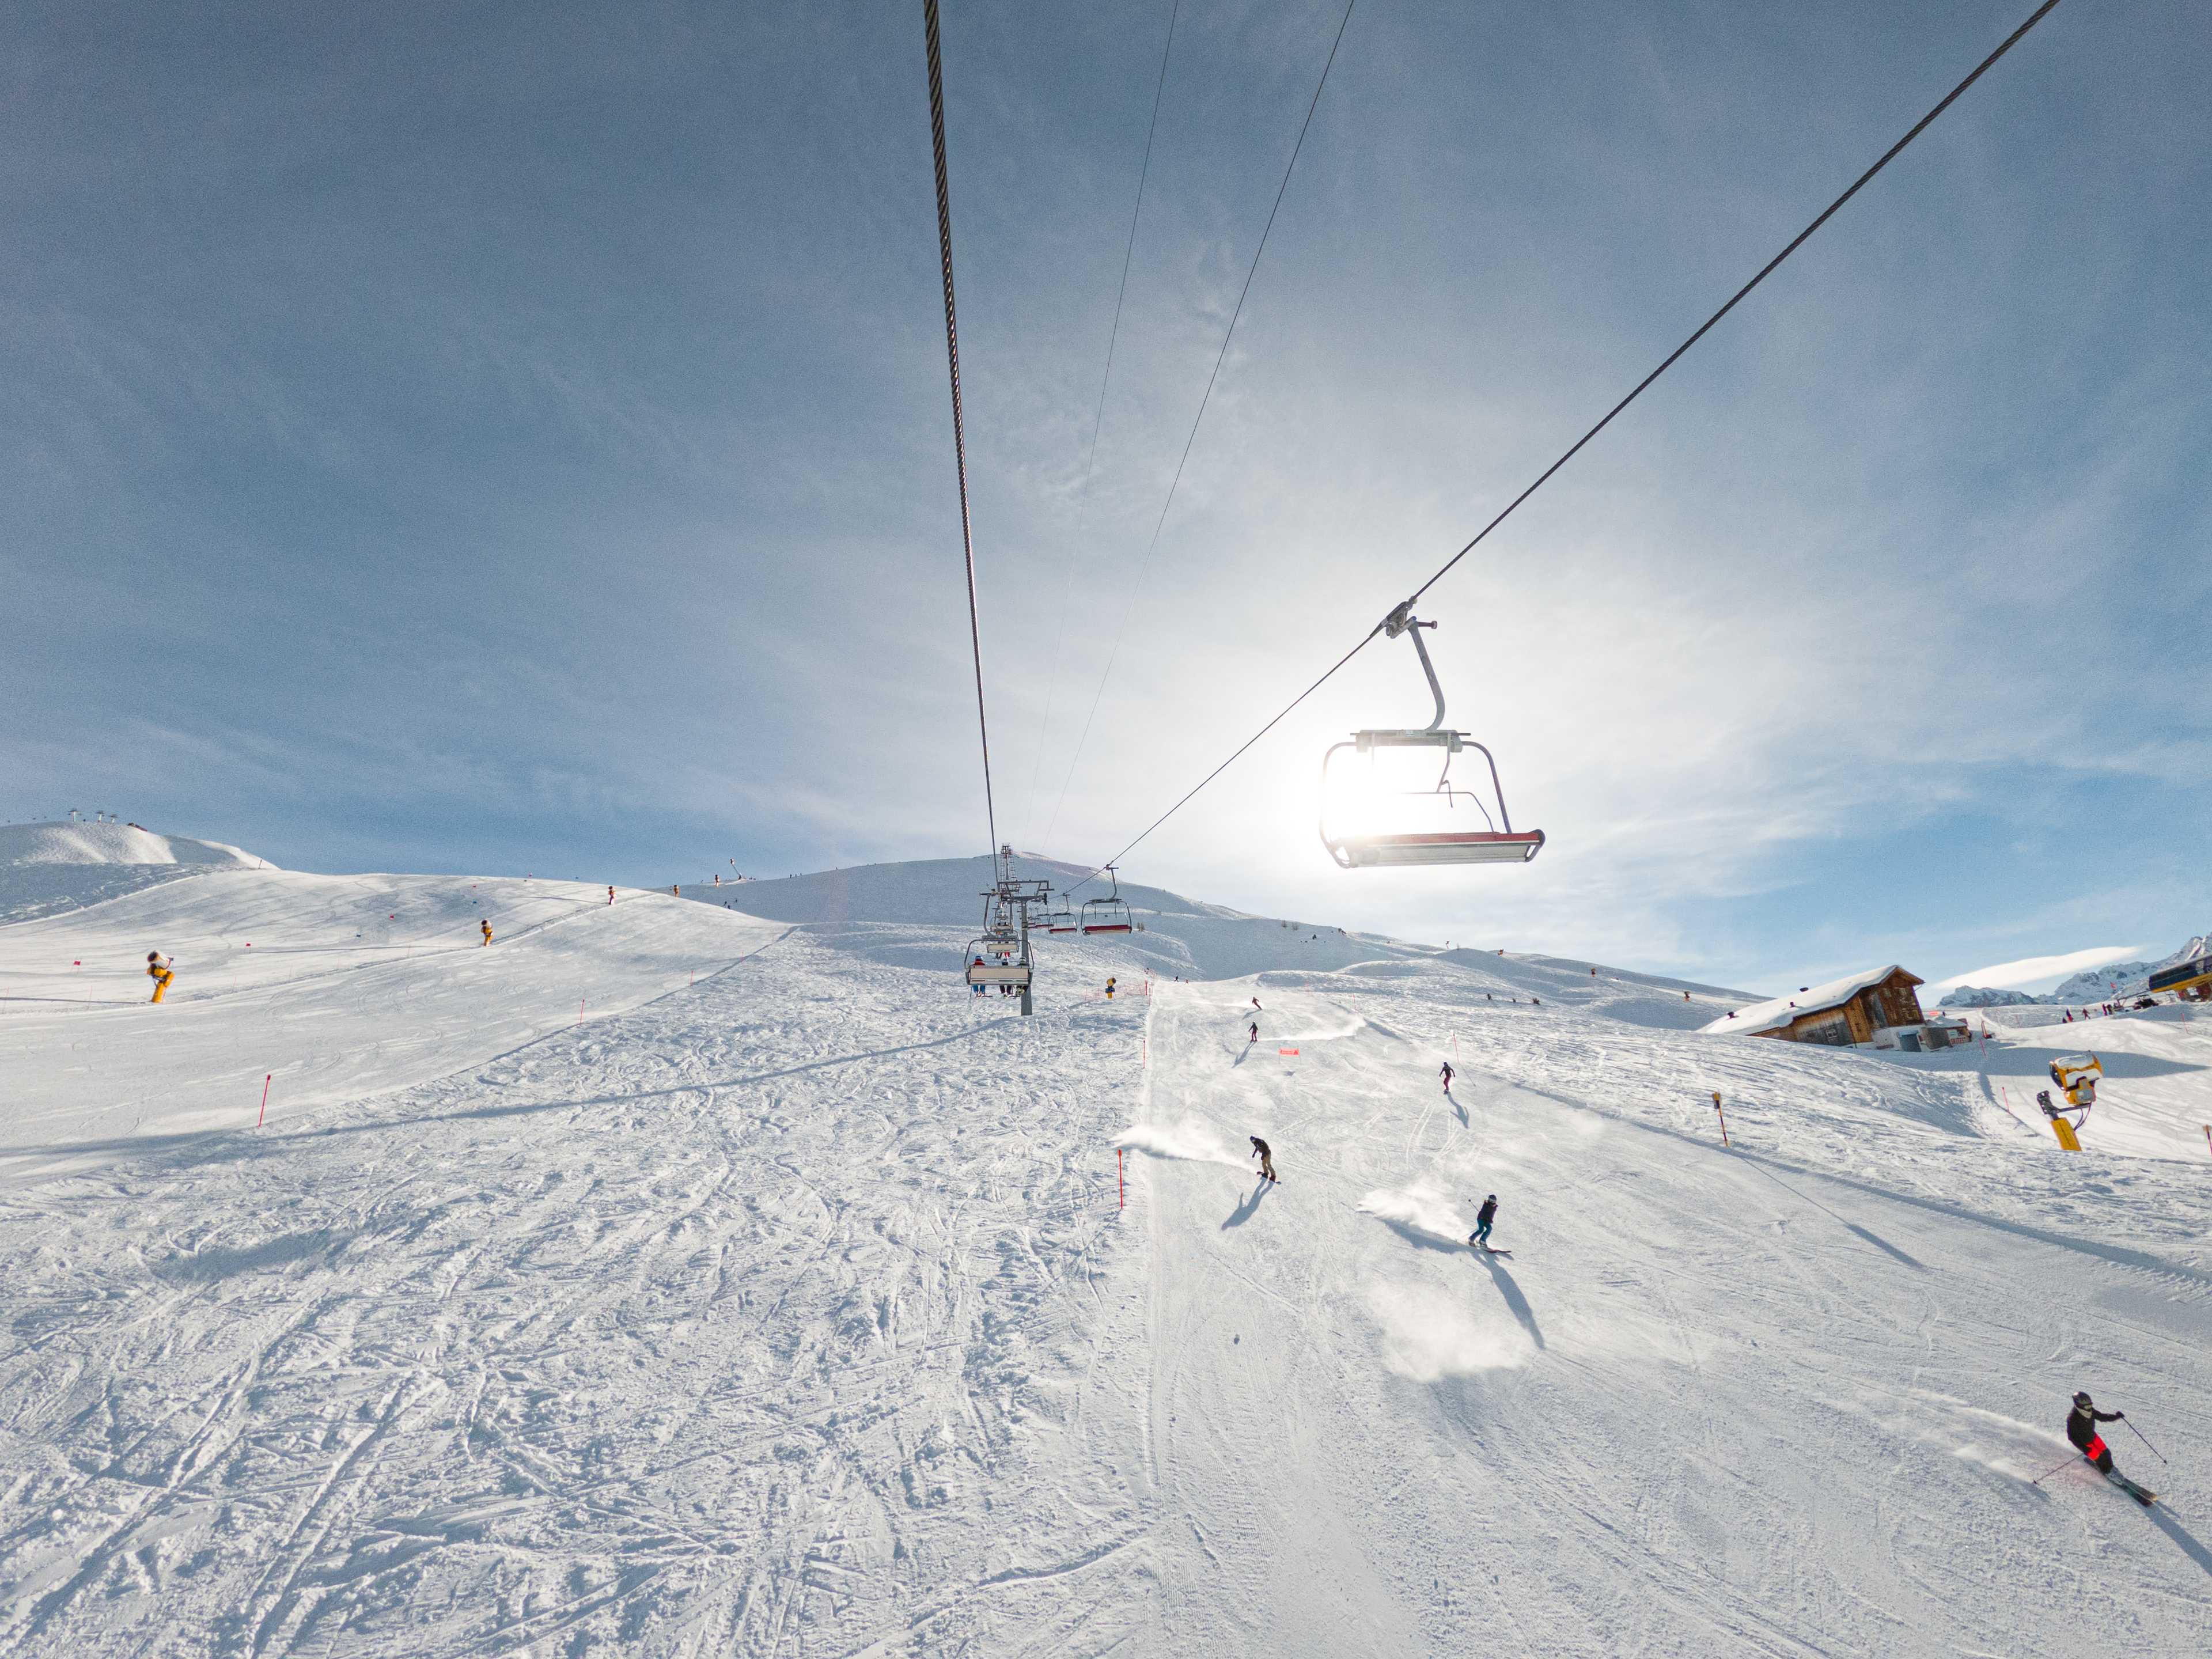 Usser Isch-Express chairlift and piste no. 8, Jakobshorn, Davos